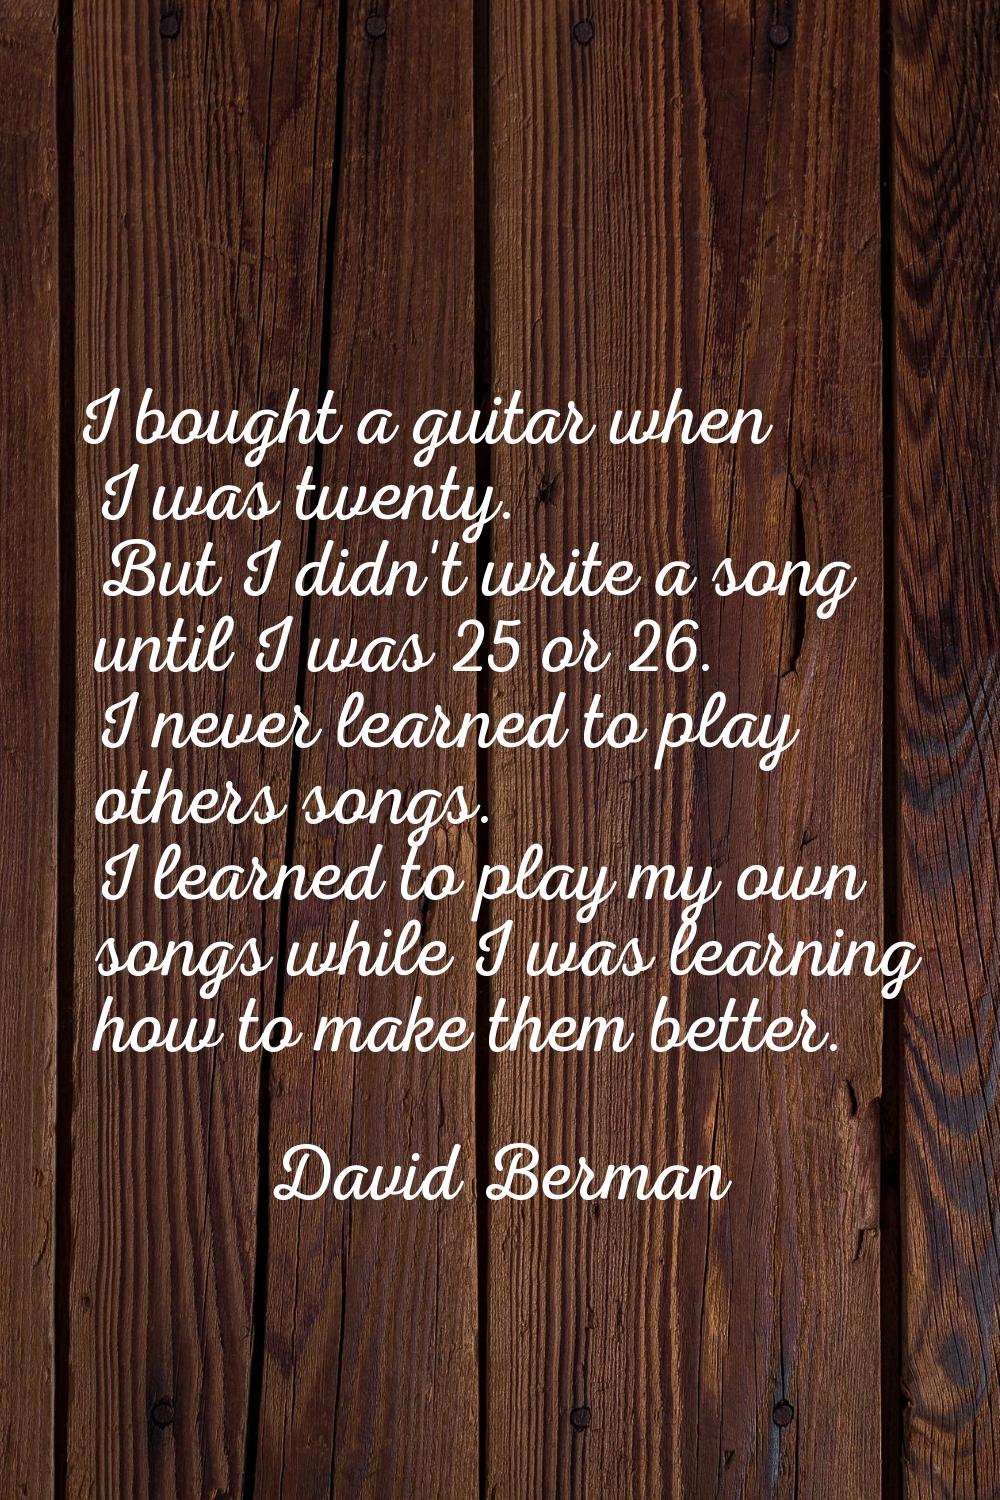 I bought a guitar when I was twenty. But I didn't write a song until I was 25 or 26. I never learne